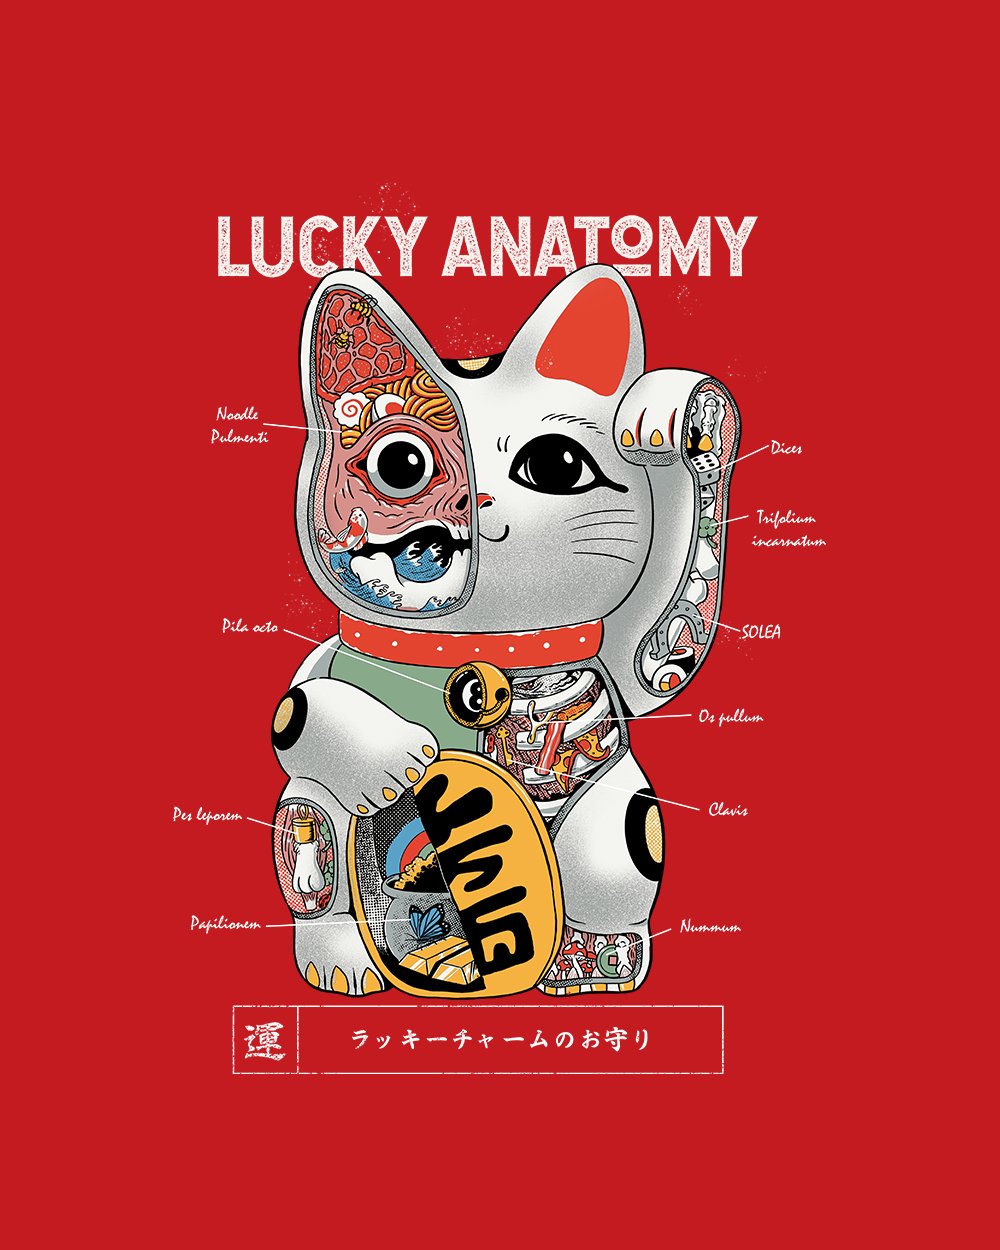 Lucky Anatomy Hoodie Australia Online #colour_red